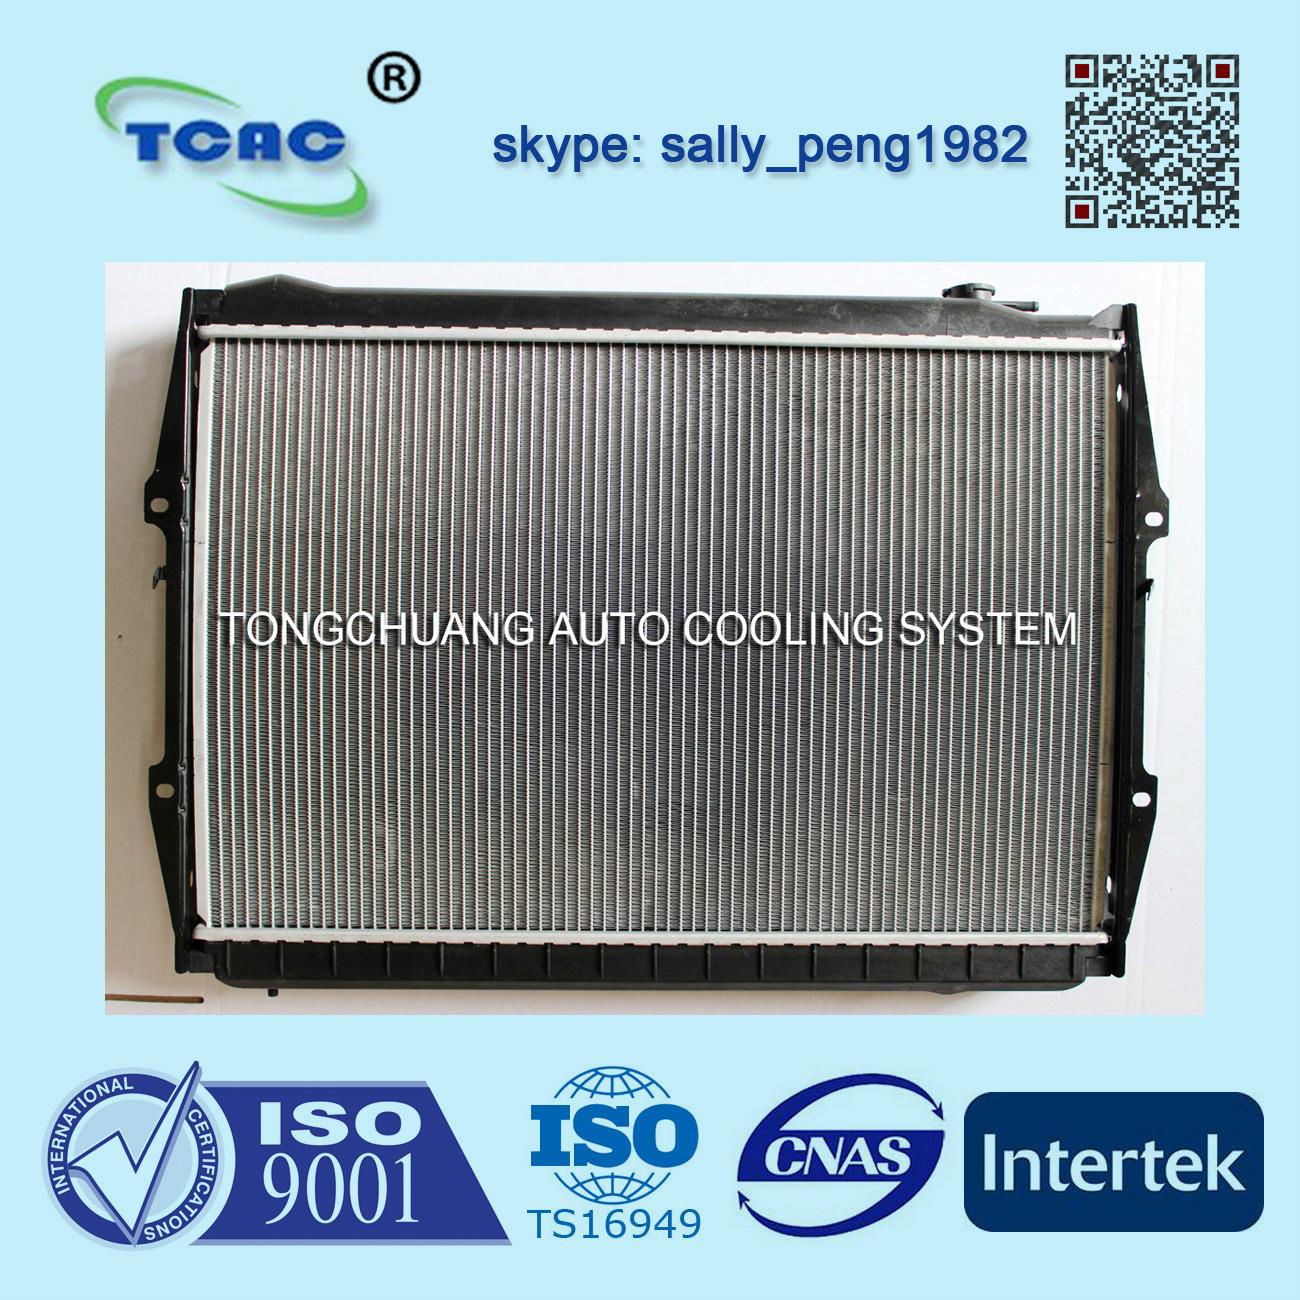 Aluminum auto radiator DPI 1512 for TOYOTA T100 AT from OEM 2